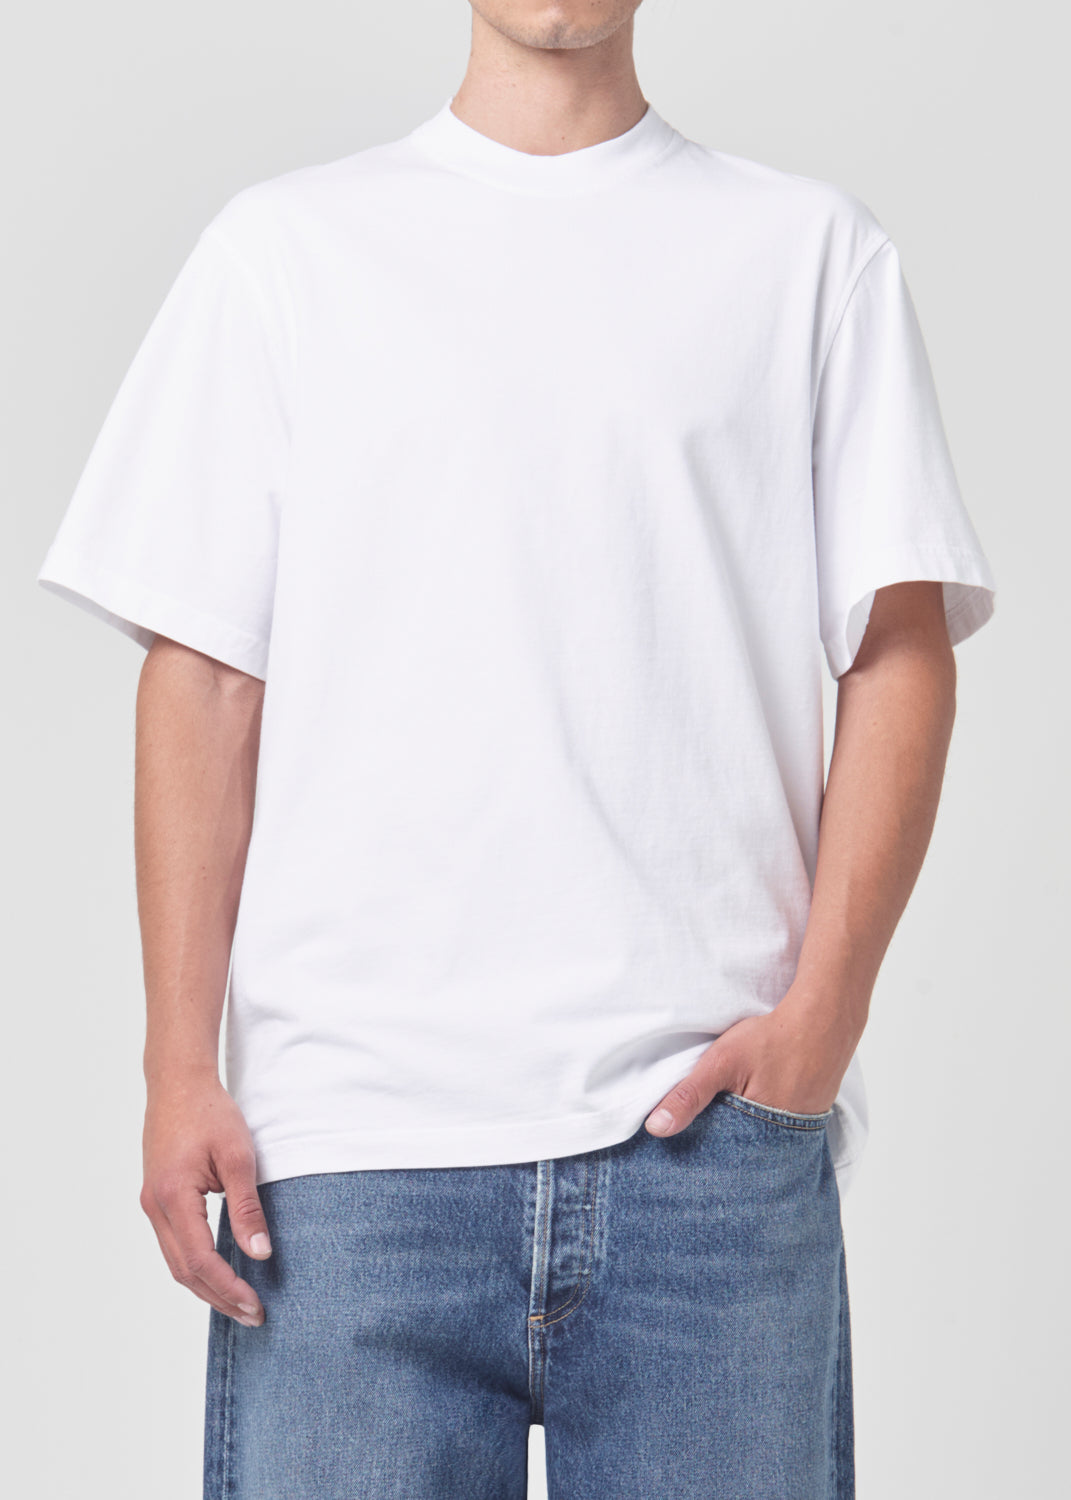 Asha Mock Neck Tee in White front